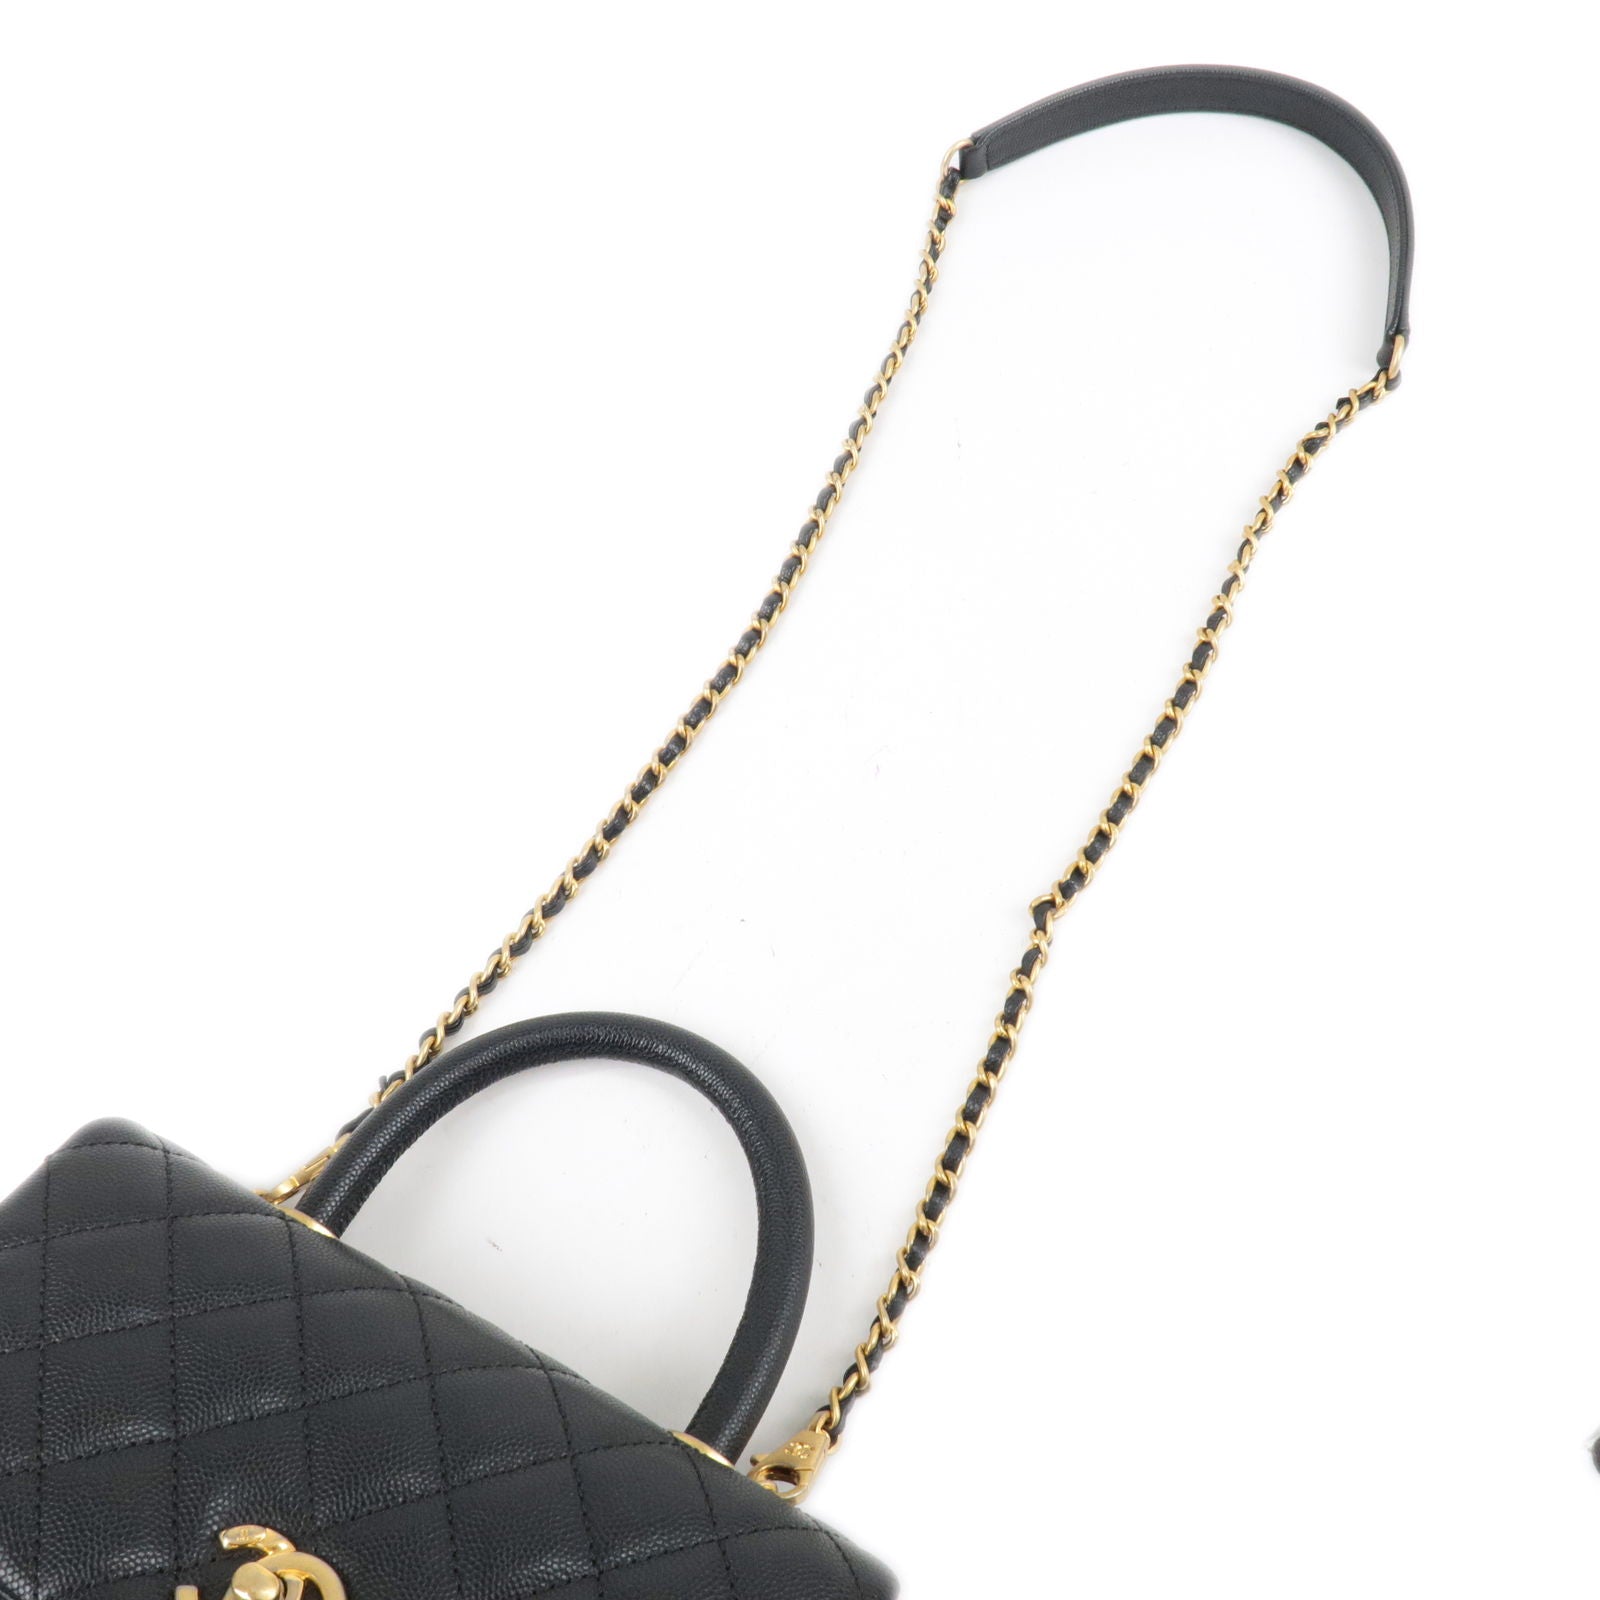 CHANEL-Caviar-Skin-COCO-Handle-24-2Way-Hand-Bag-Black-A92990 –  dct-ep_vintage luxury Store